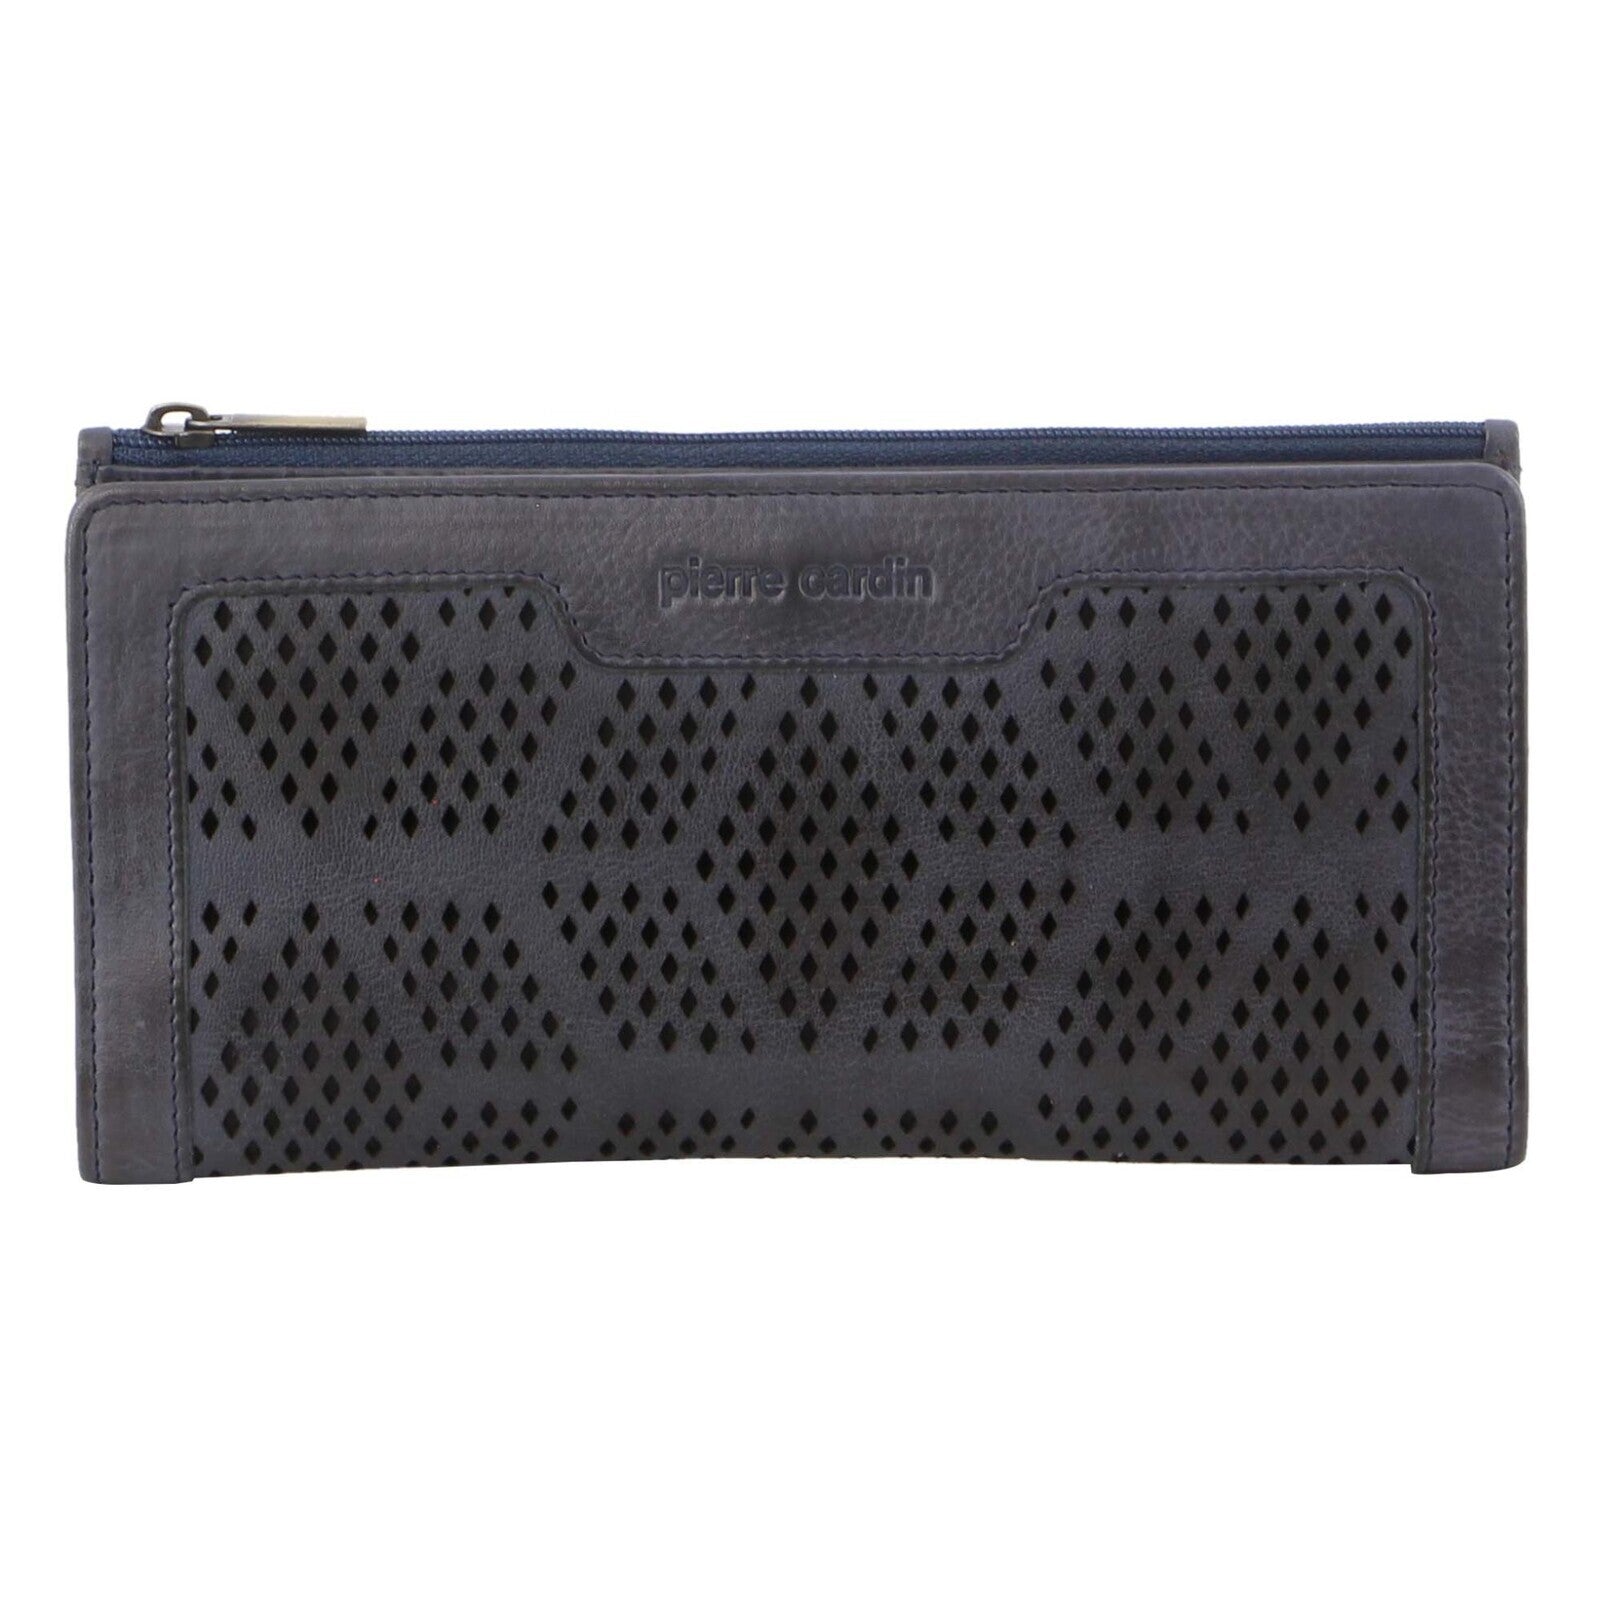 Perforated Leather Ladies Handy Travel Wallet - Teal